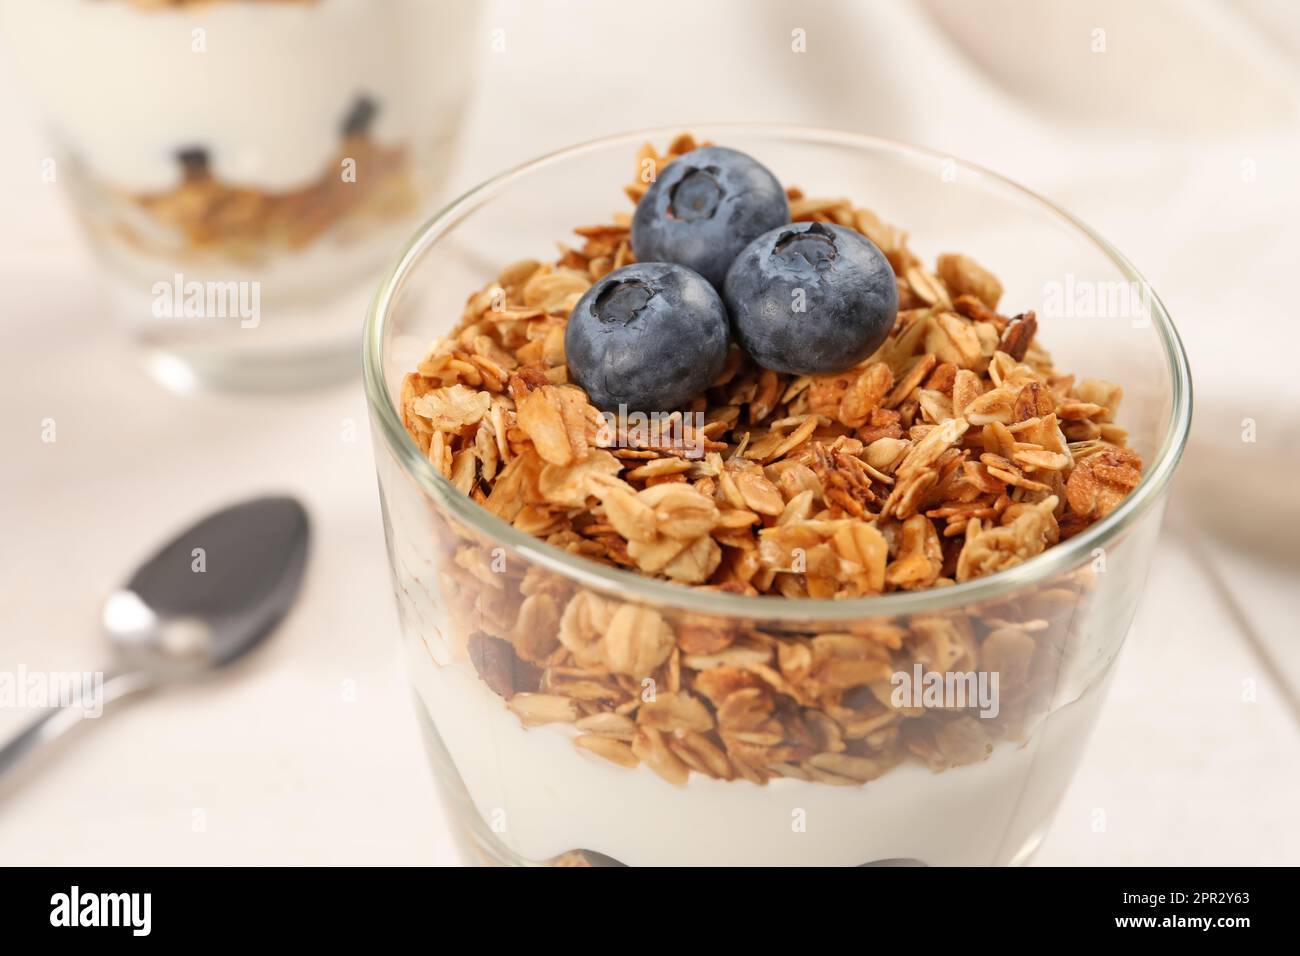 Glass of tasty yogurt with muesli and blueberries served on white table, closeup Stock Photo